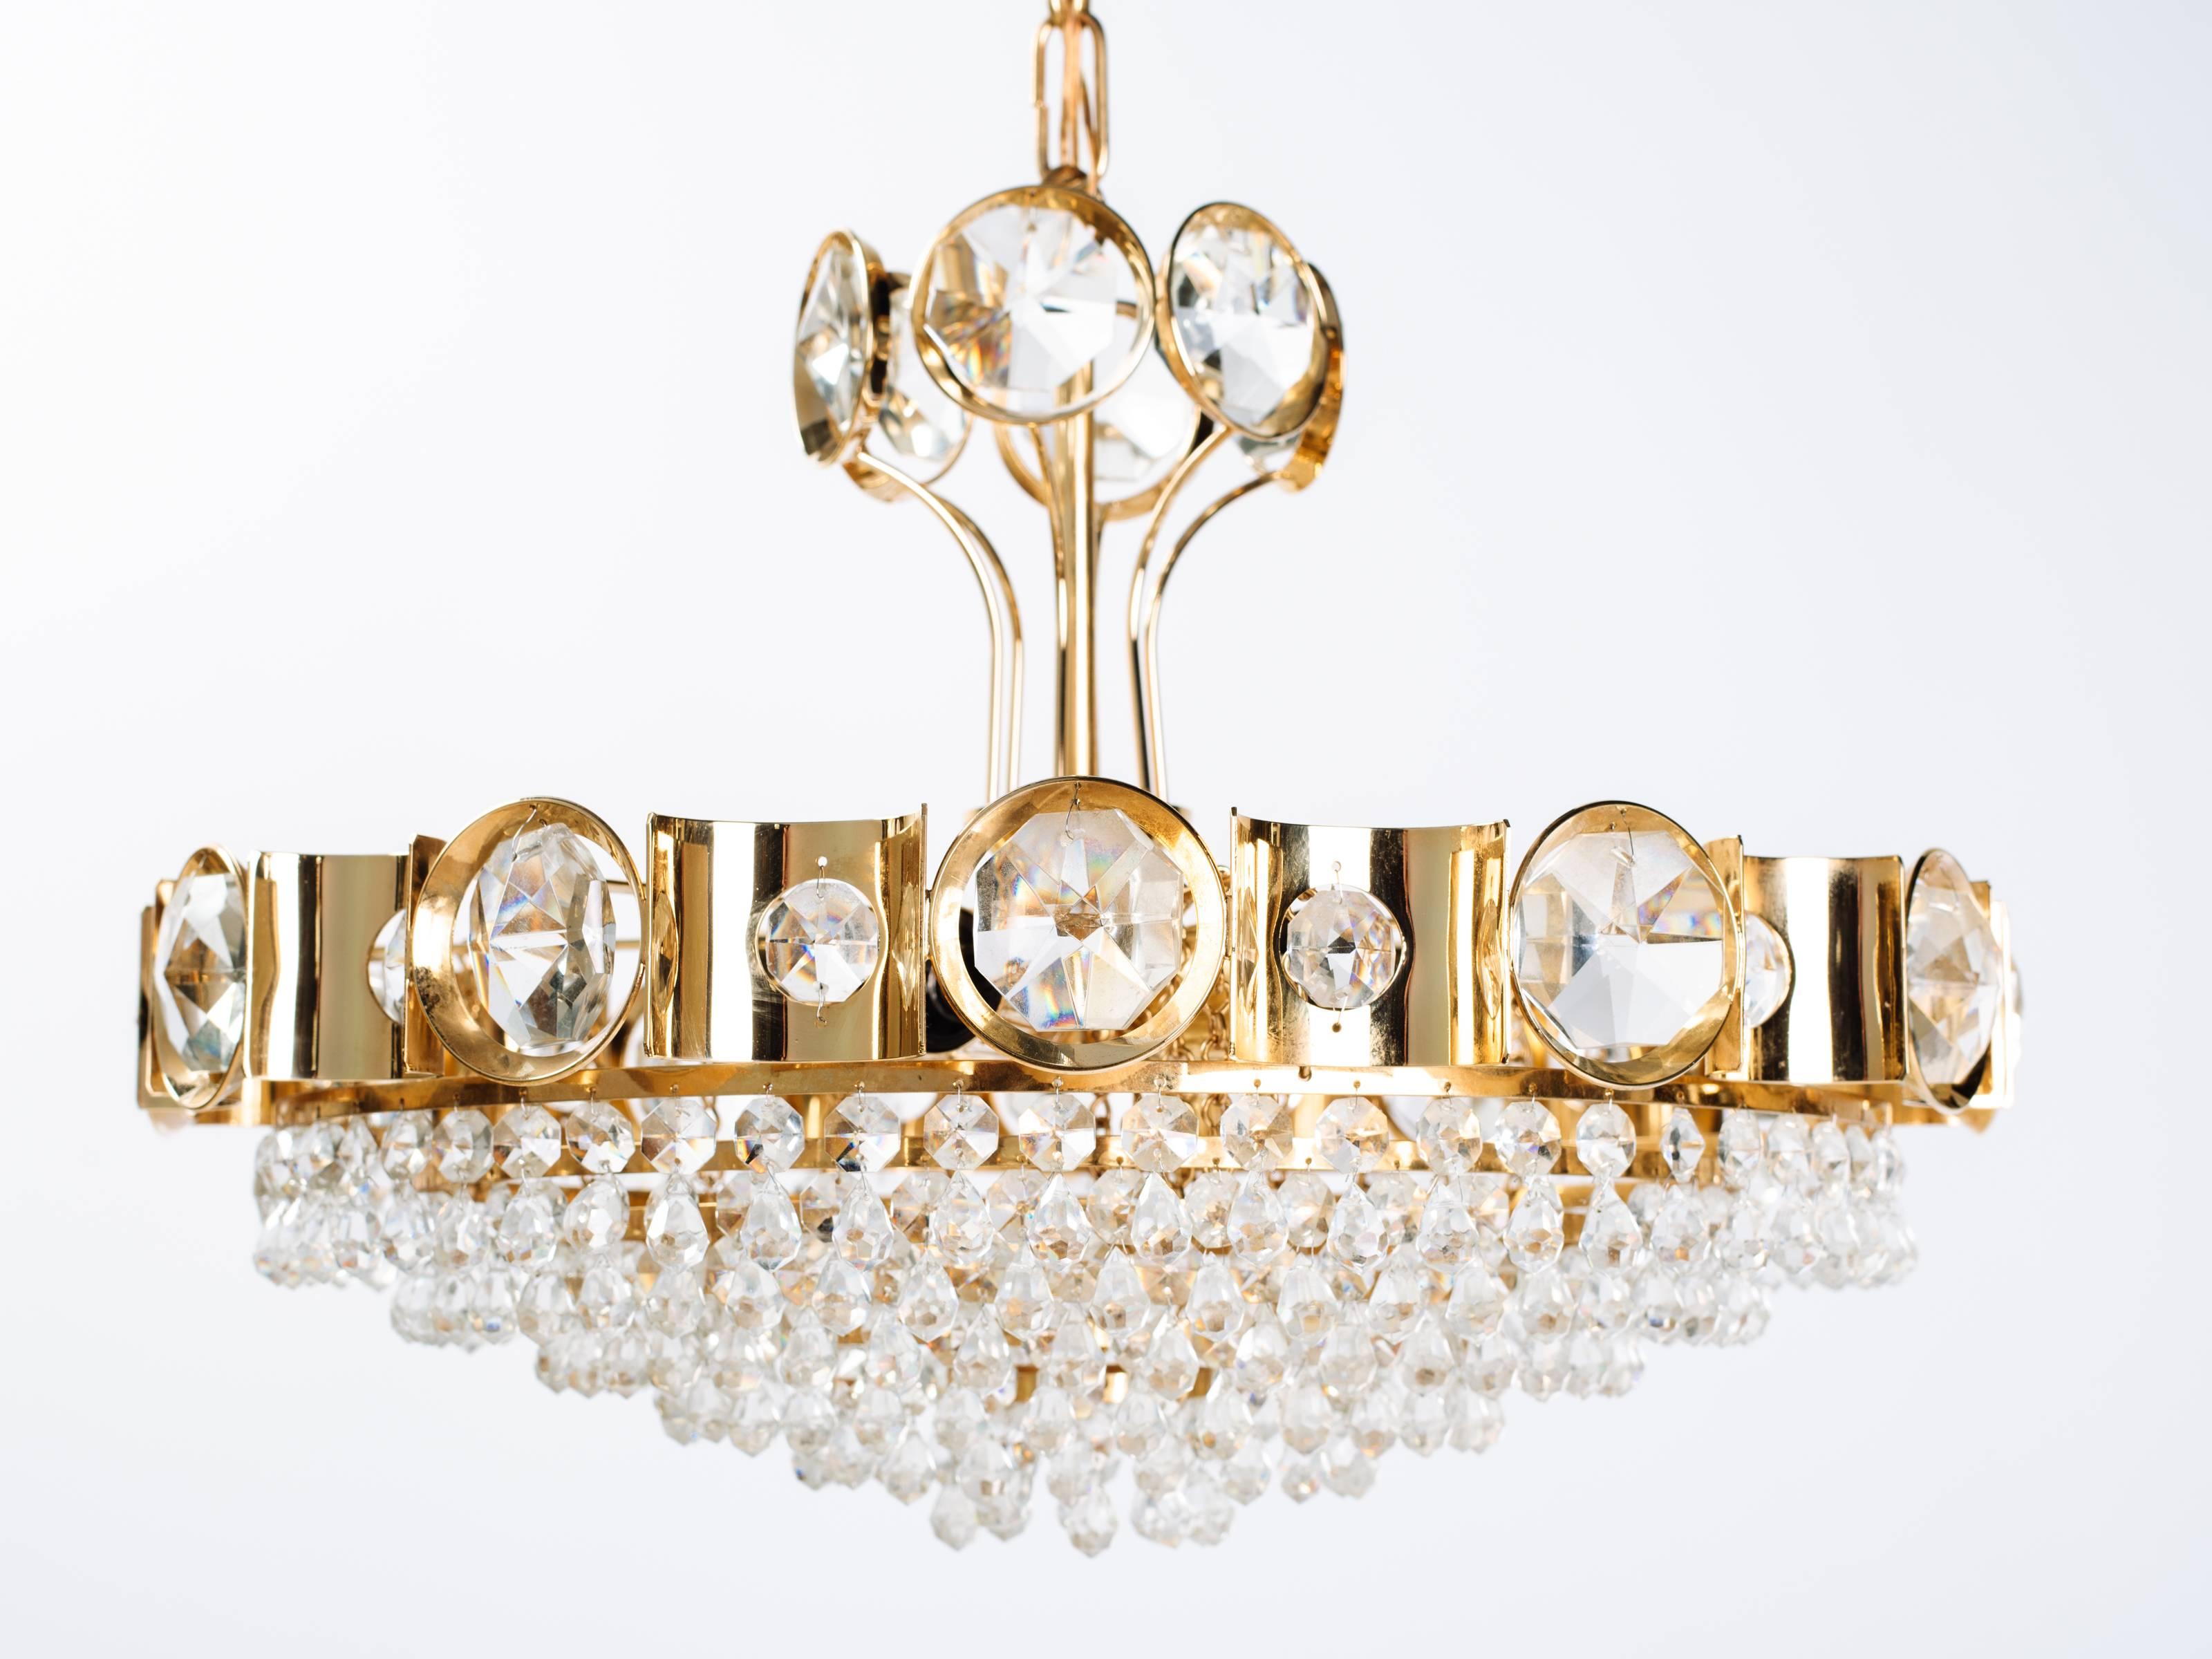 Hollywood Regency gold plated chandelier fitted with tiers of elegant cut crystal pendants and faceted crystal beads. The chandelier has a multi-tier design with a scalloped frame fitted with stunning oversized jeweled crystals along the top.